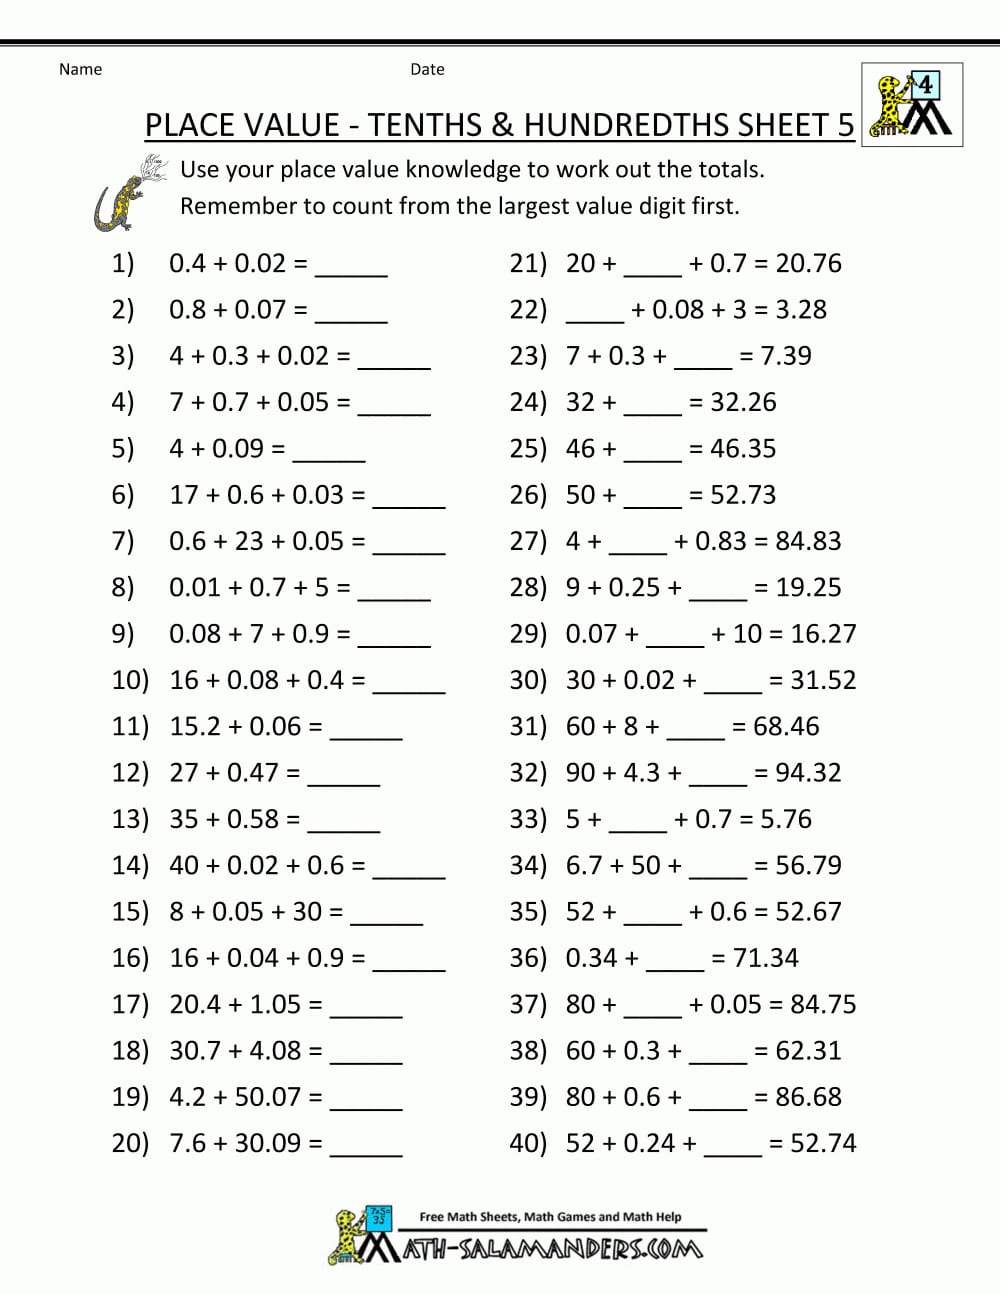 place-value-worksheets-4th-grade-db-excel